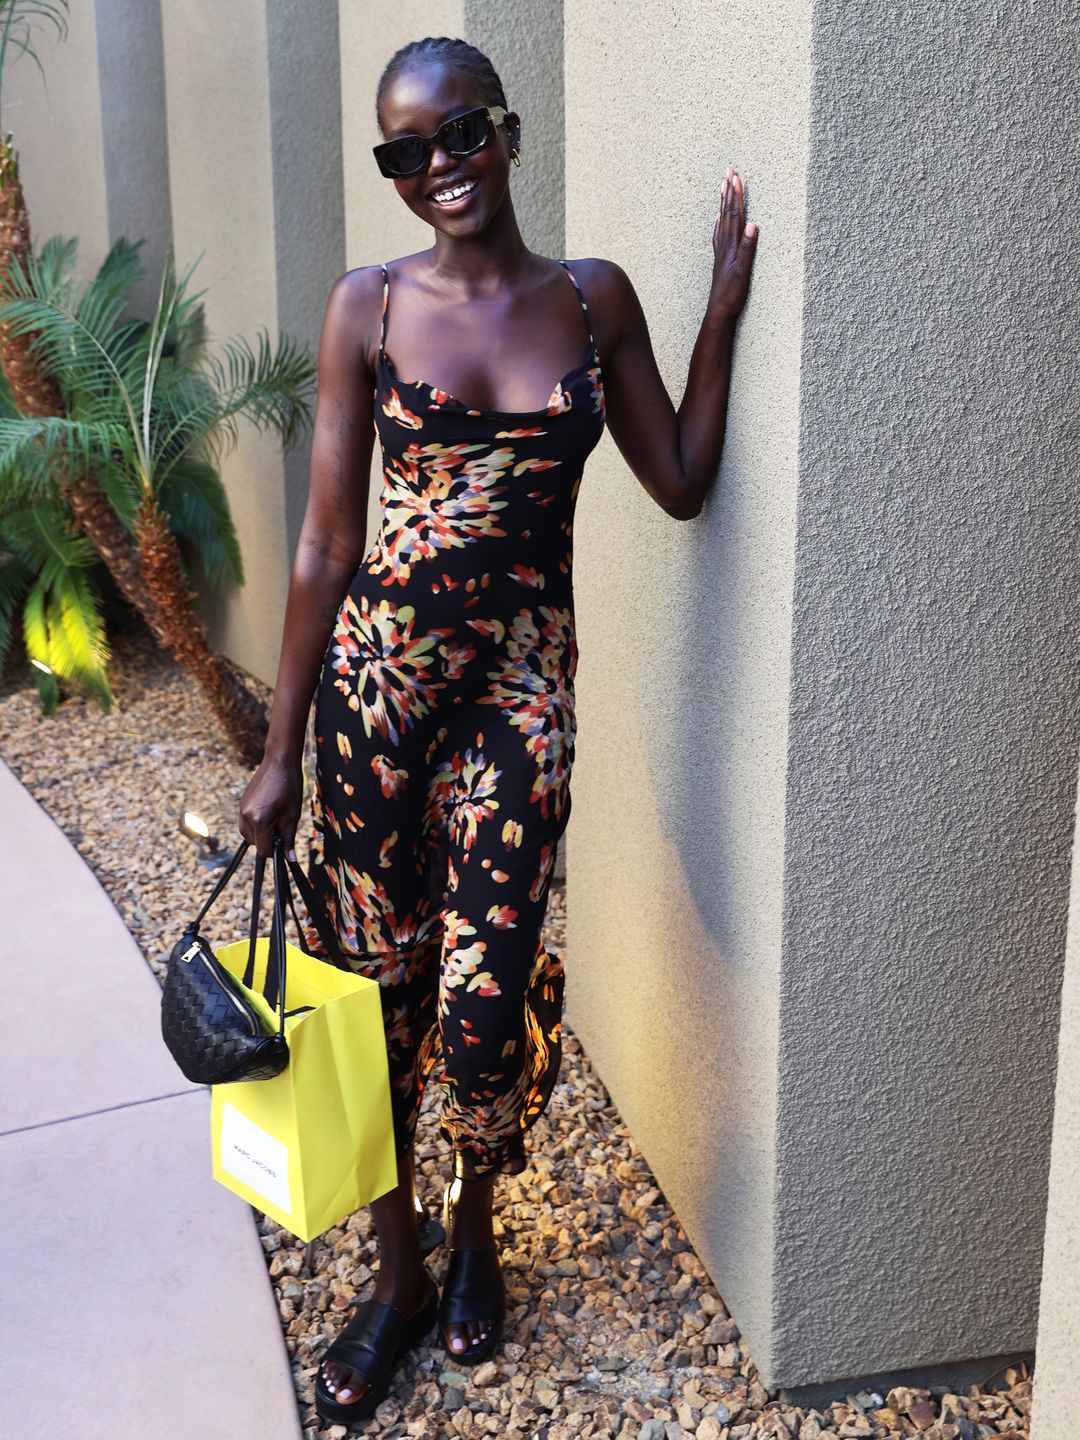 PALM SPRINGS, CALIFORNIA - APRIL 15: Adut Akech attends the Marc Jacobs & i-D 'The Pre-Party' at Viking Villa on April 15, 2023 in Palm Springs, California. (Photo by Mat Hayward/Getty Images for Marc Jacobs and i-D)